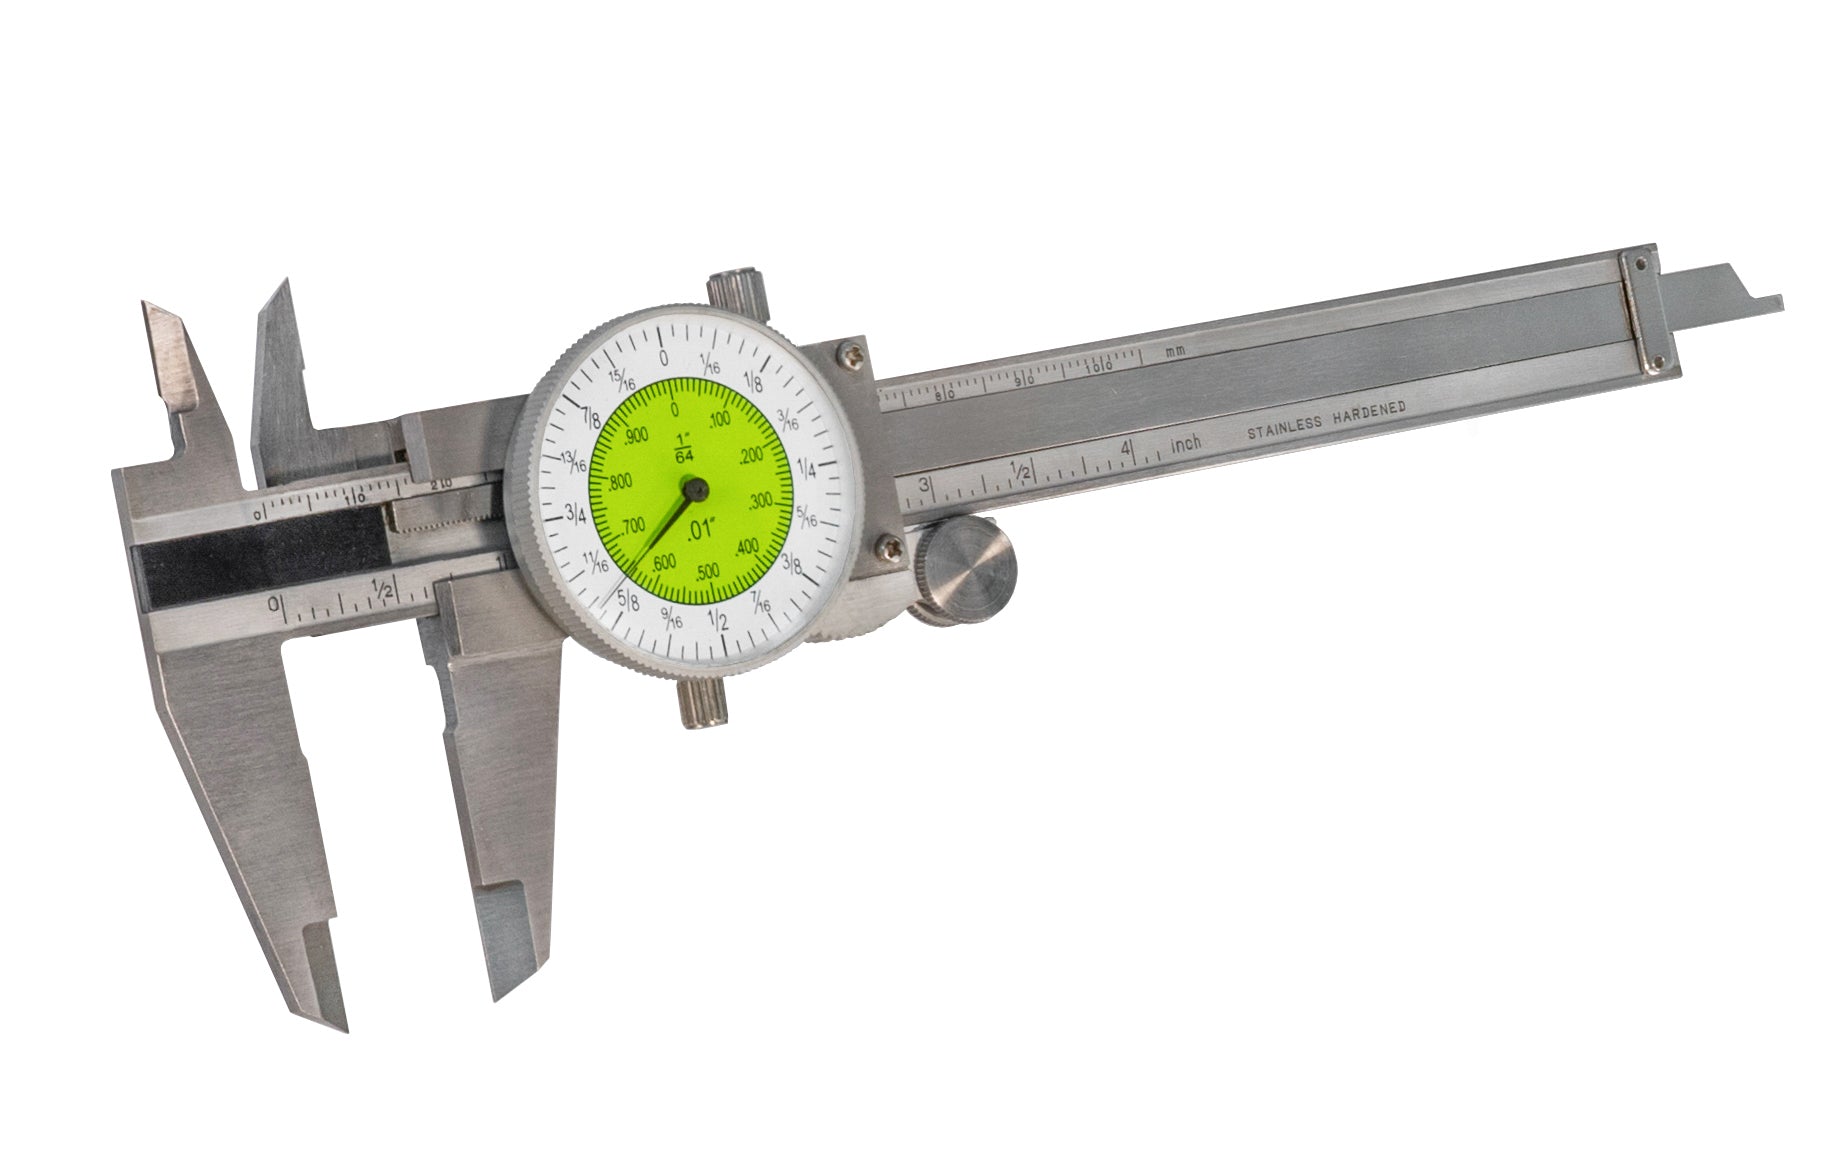 4" Fractional Inch Dial Pocket Caliper - 1/64" & .01 Grads - Dial travels 1" per revolution - Precision ground jaws - Stainless steel